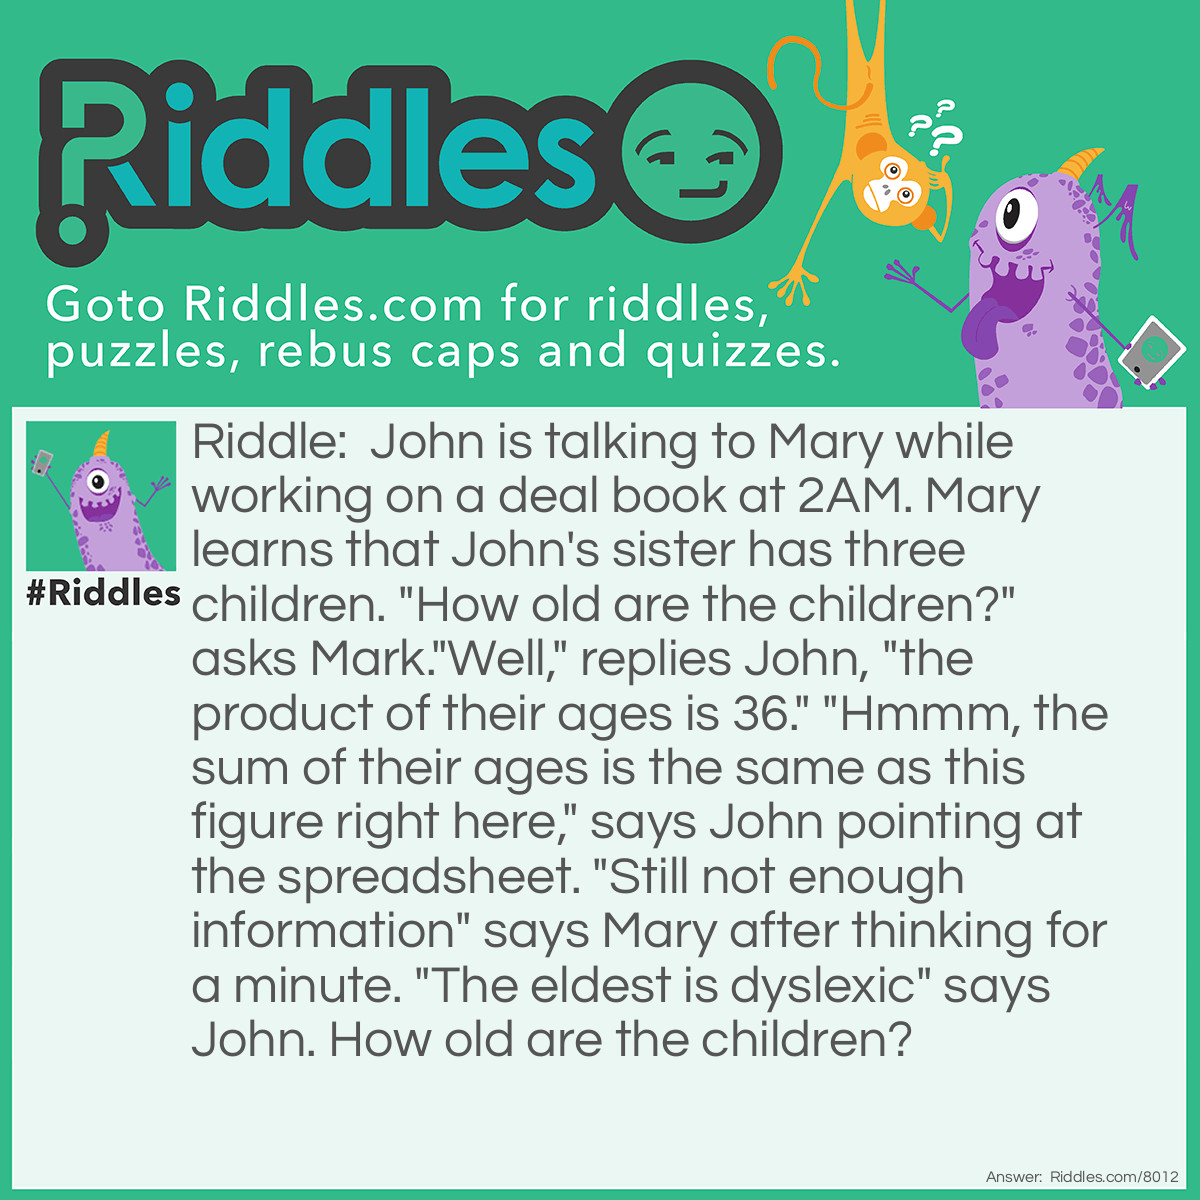 Riddle: John is talking to Mary while working on a deal book at 2AM. Mary learns that John's sister has three children. "How old are the children?" asks Mark."Well," replies John, "the product of their ages is 36." "Hmmm, the sum of their ages is the same as this figure right here," says John pointing at the spreadsheet. "Still not enough information" says Mary after thinking for a minute. "The eldest is dyslexic" says John. How old are the children? Answer: No answer